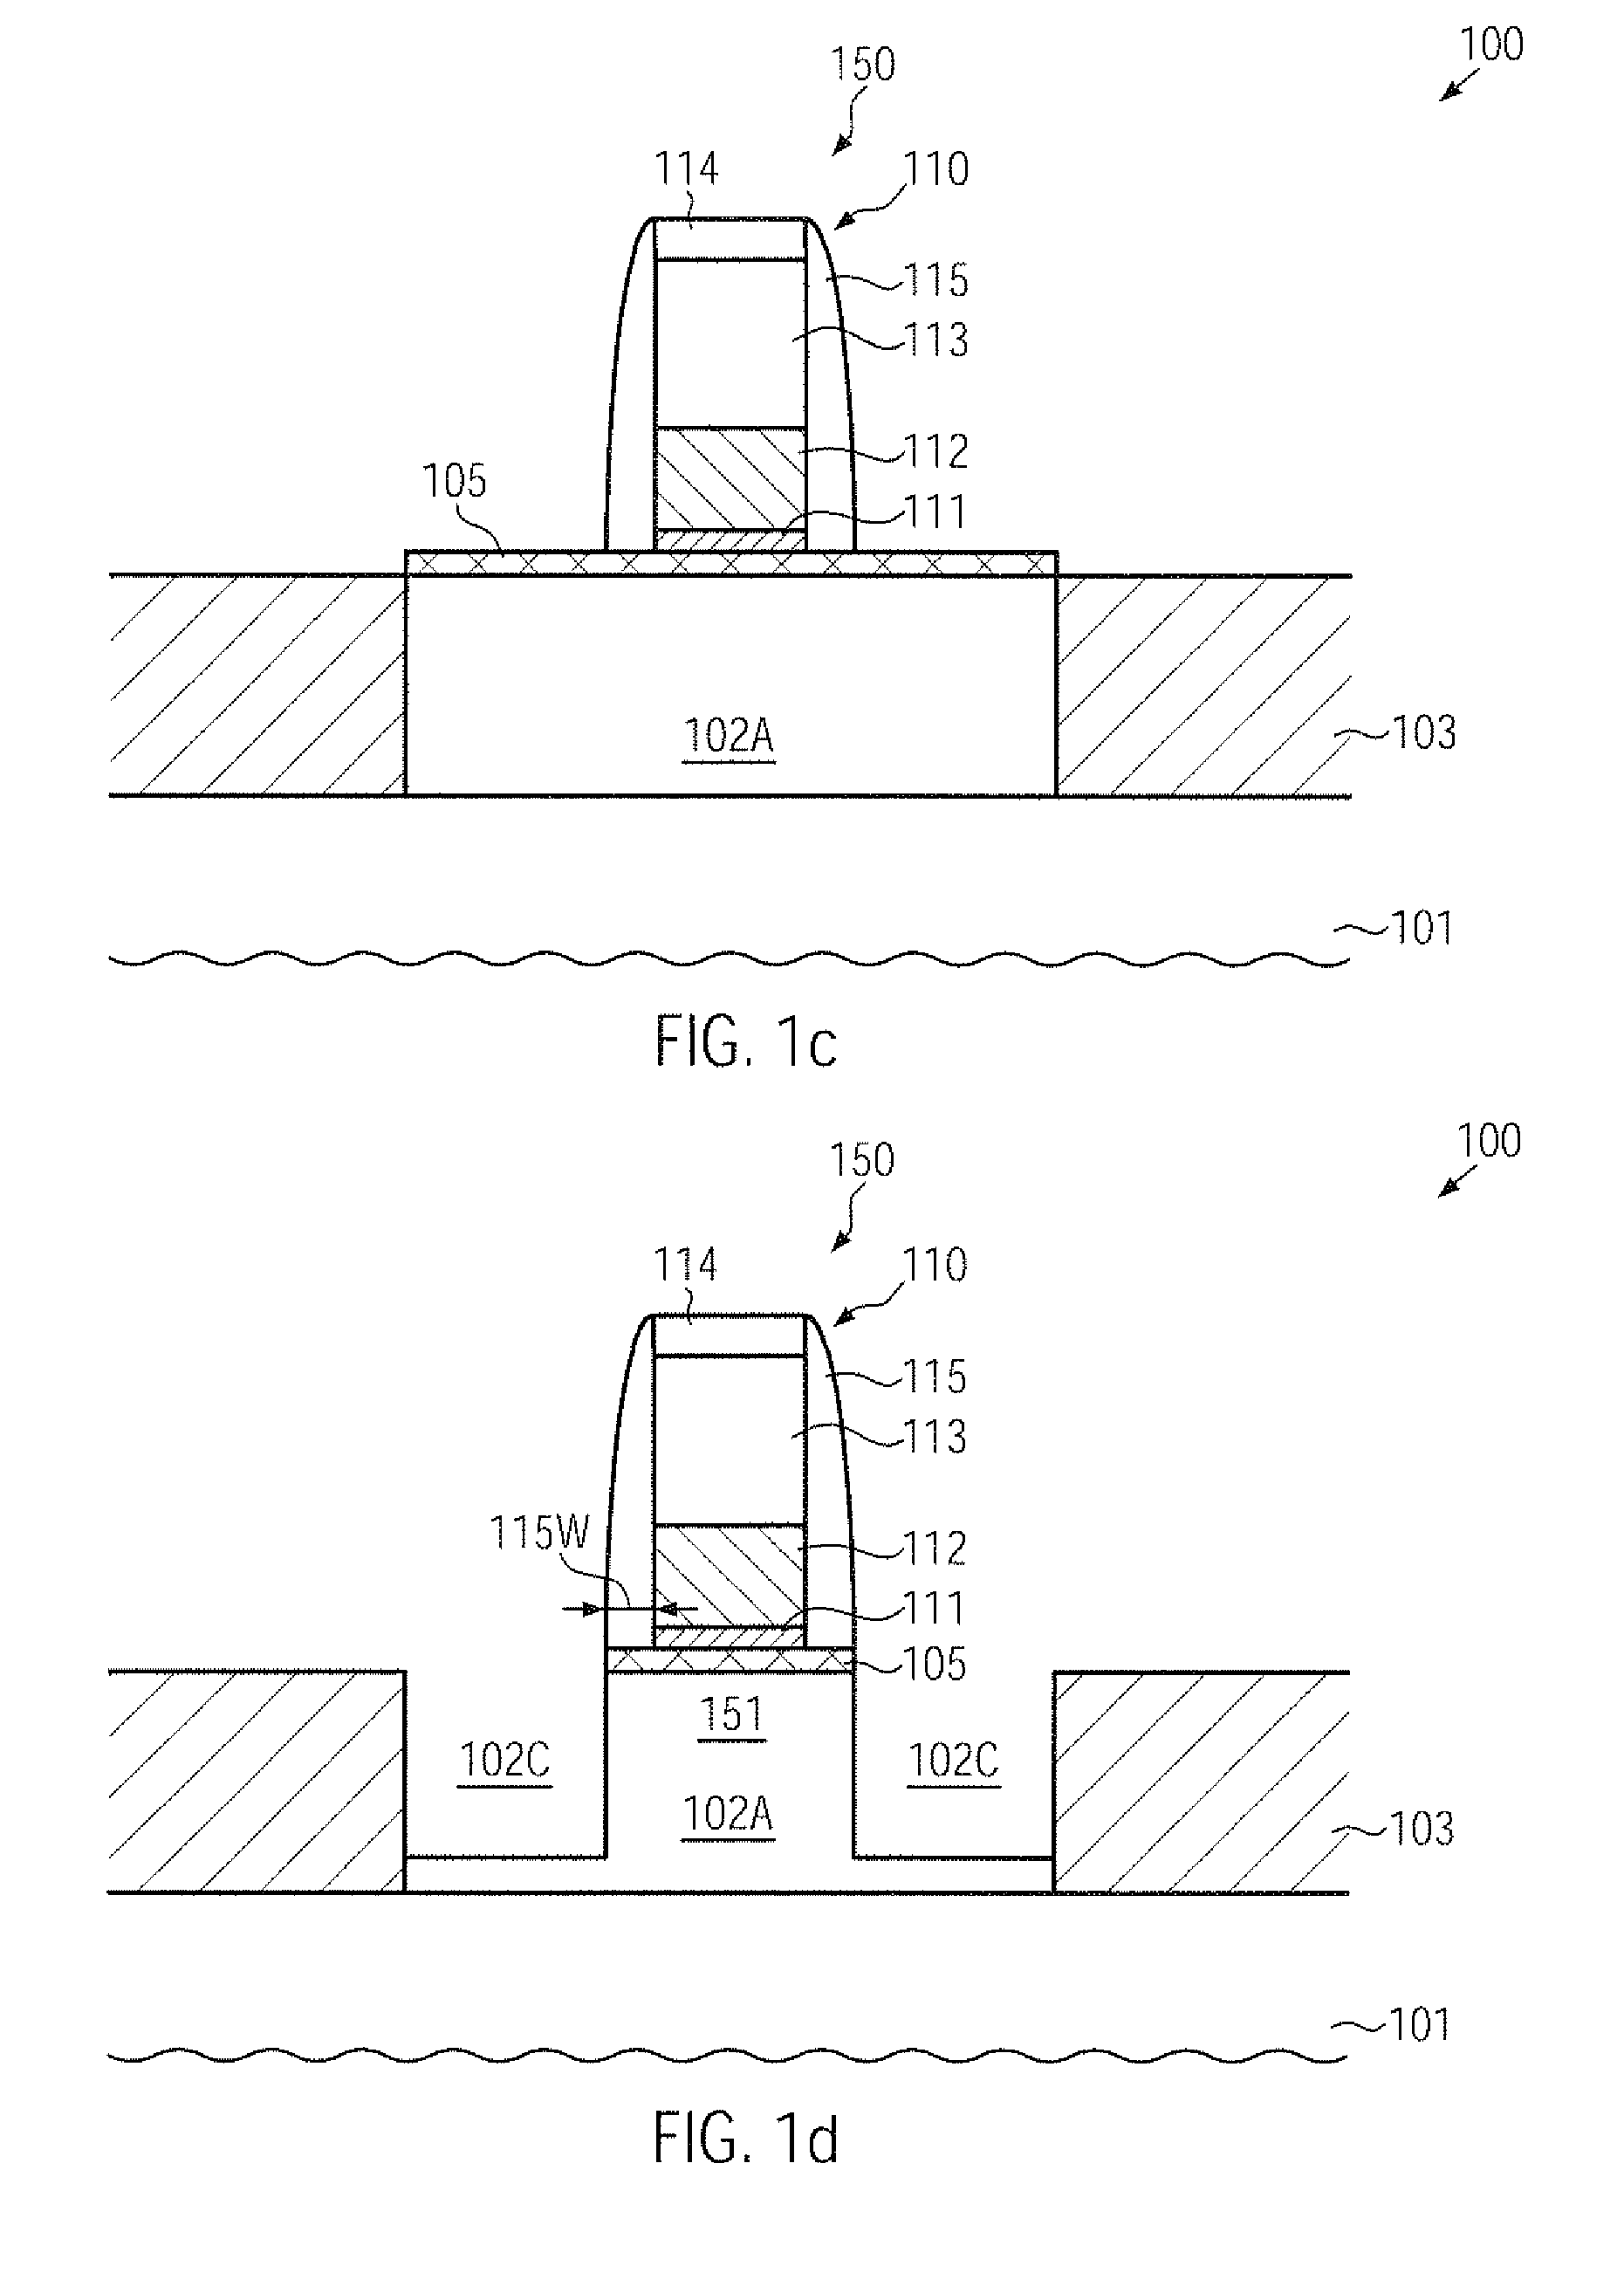 Adjusting of strain caused in a transistor channel by semiconductor material provided for threshold adjustment